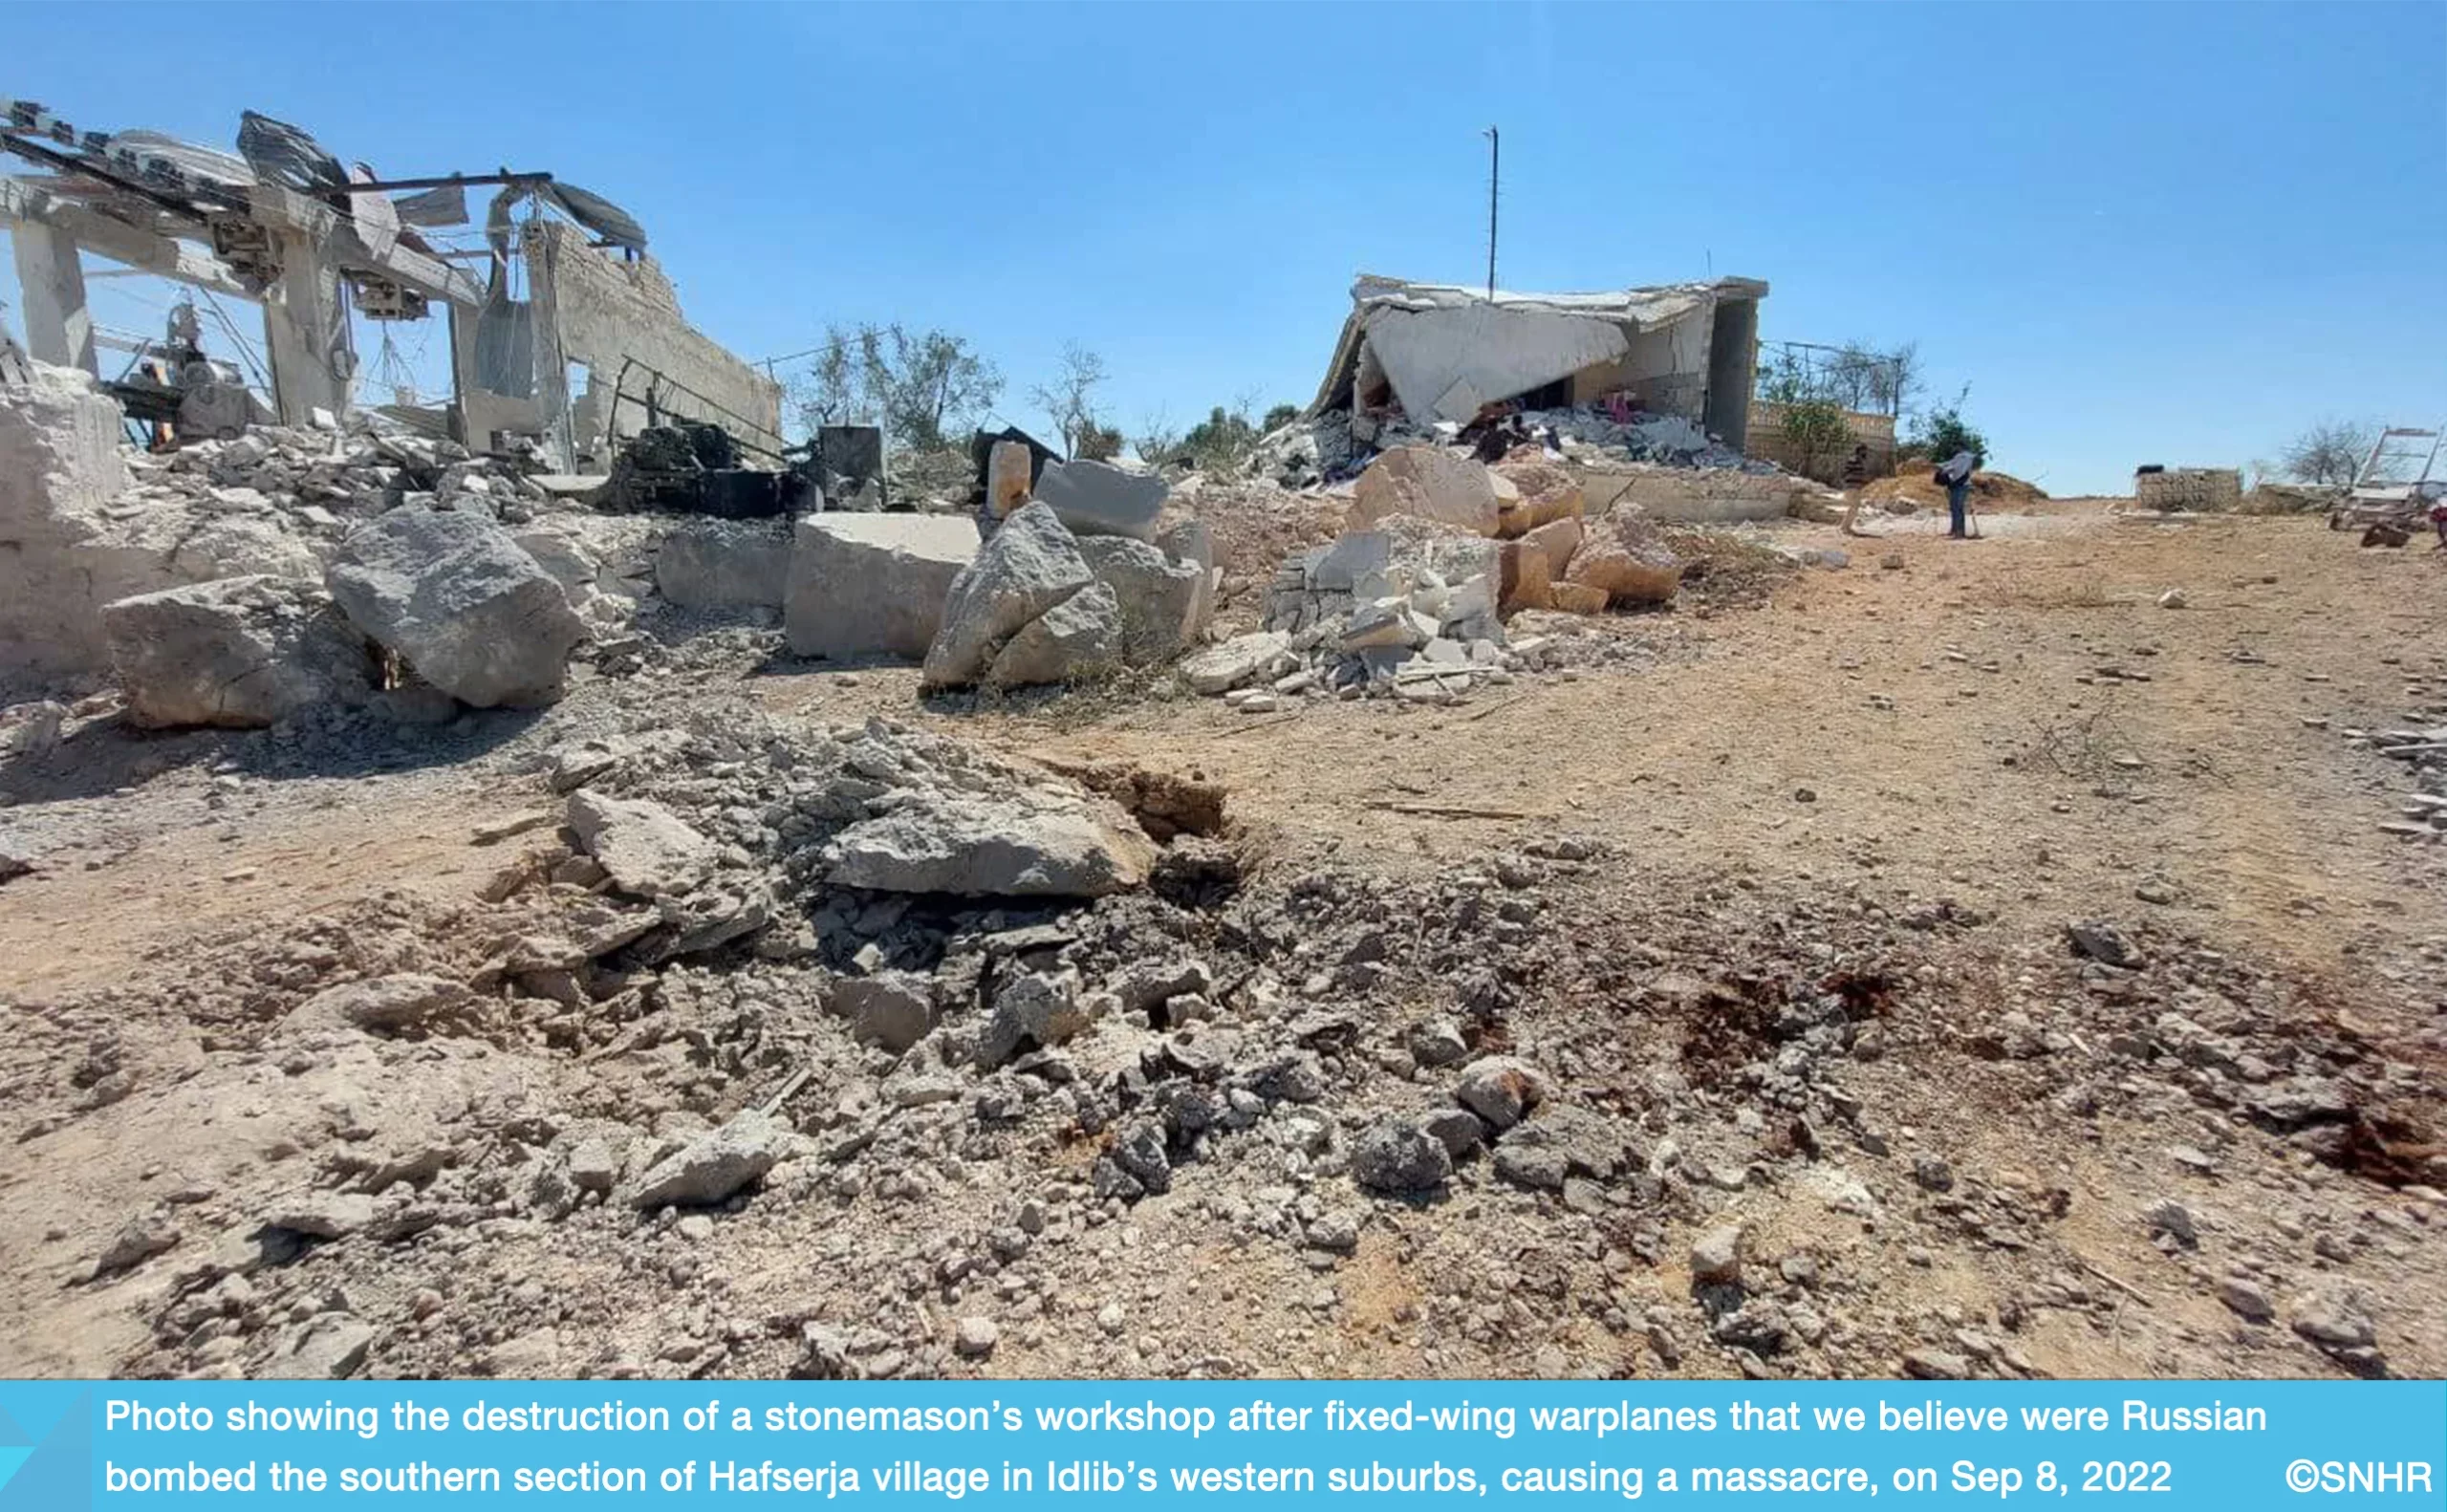 Russian airstrikes inflict a massacre of civilians in Hafserja village in Idlib on September 8